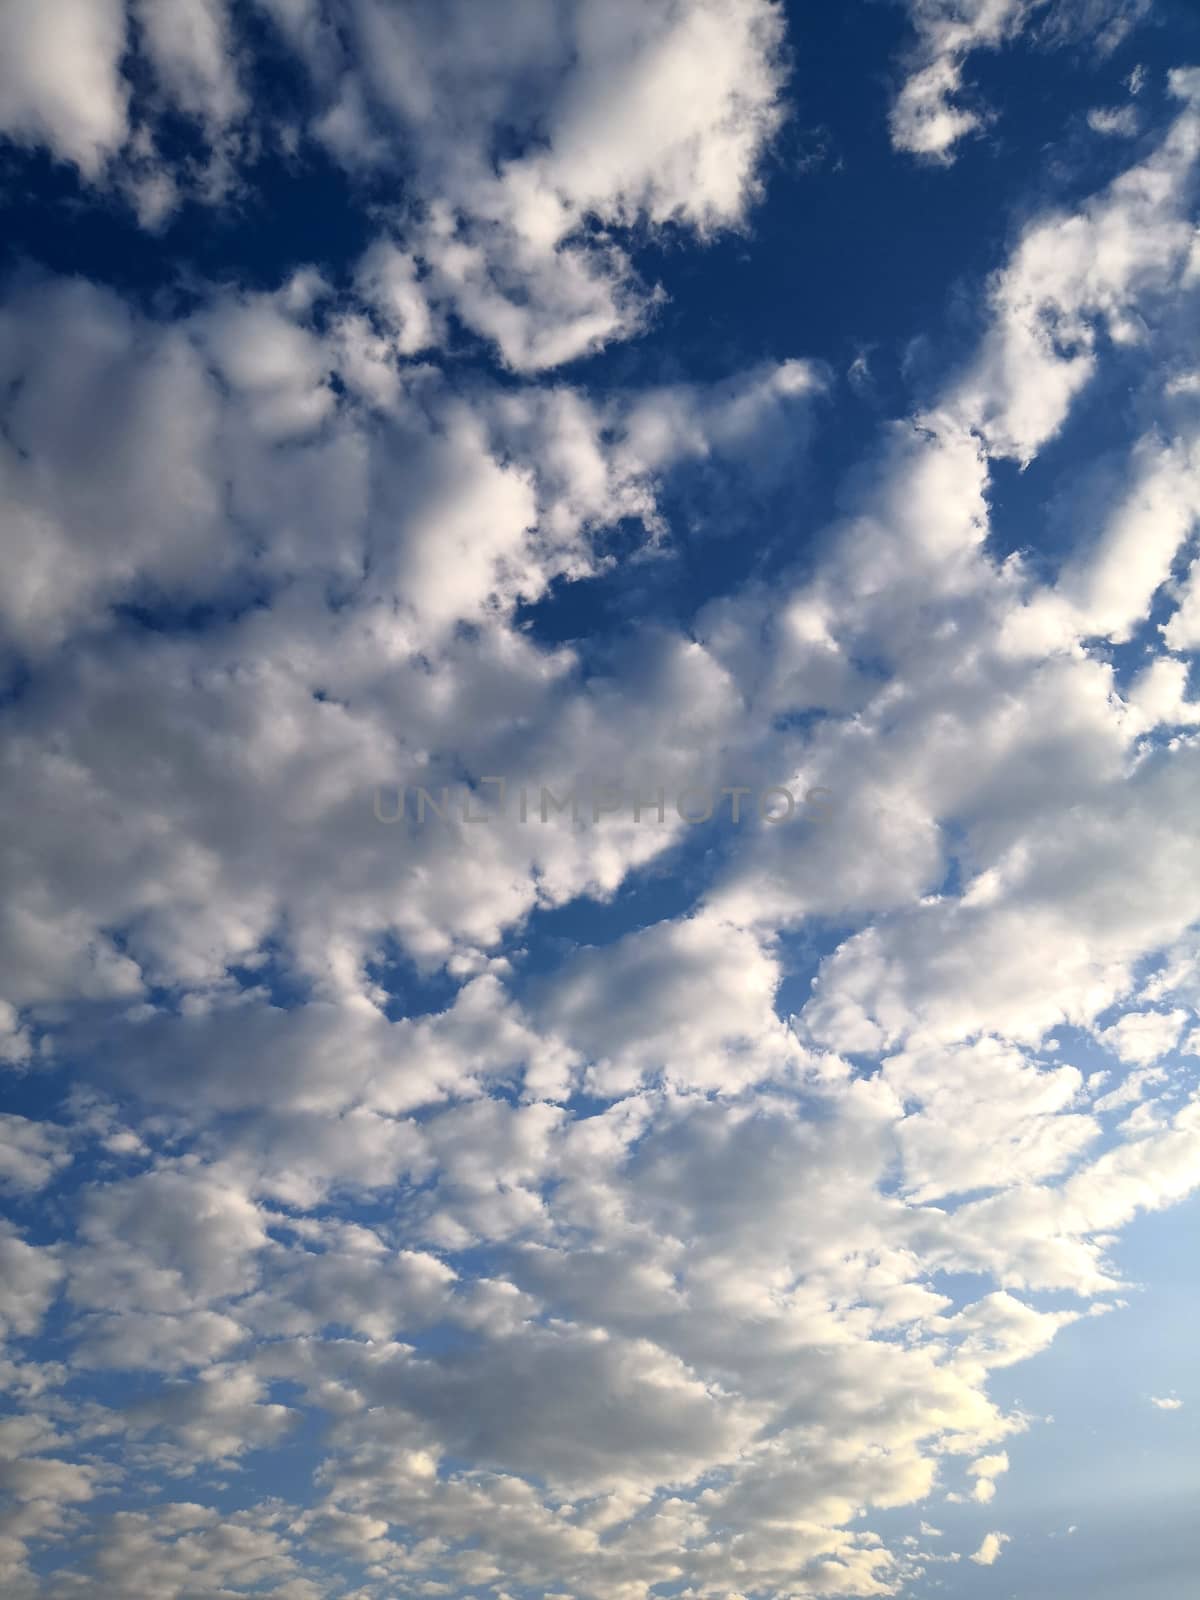 altocumulus, cloud forming a layer of rounded masses with a level base